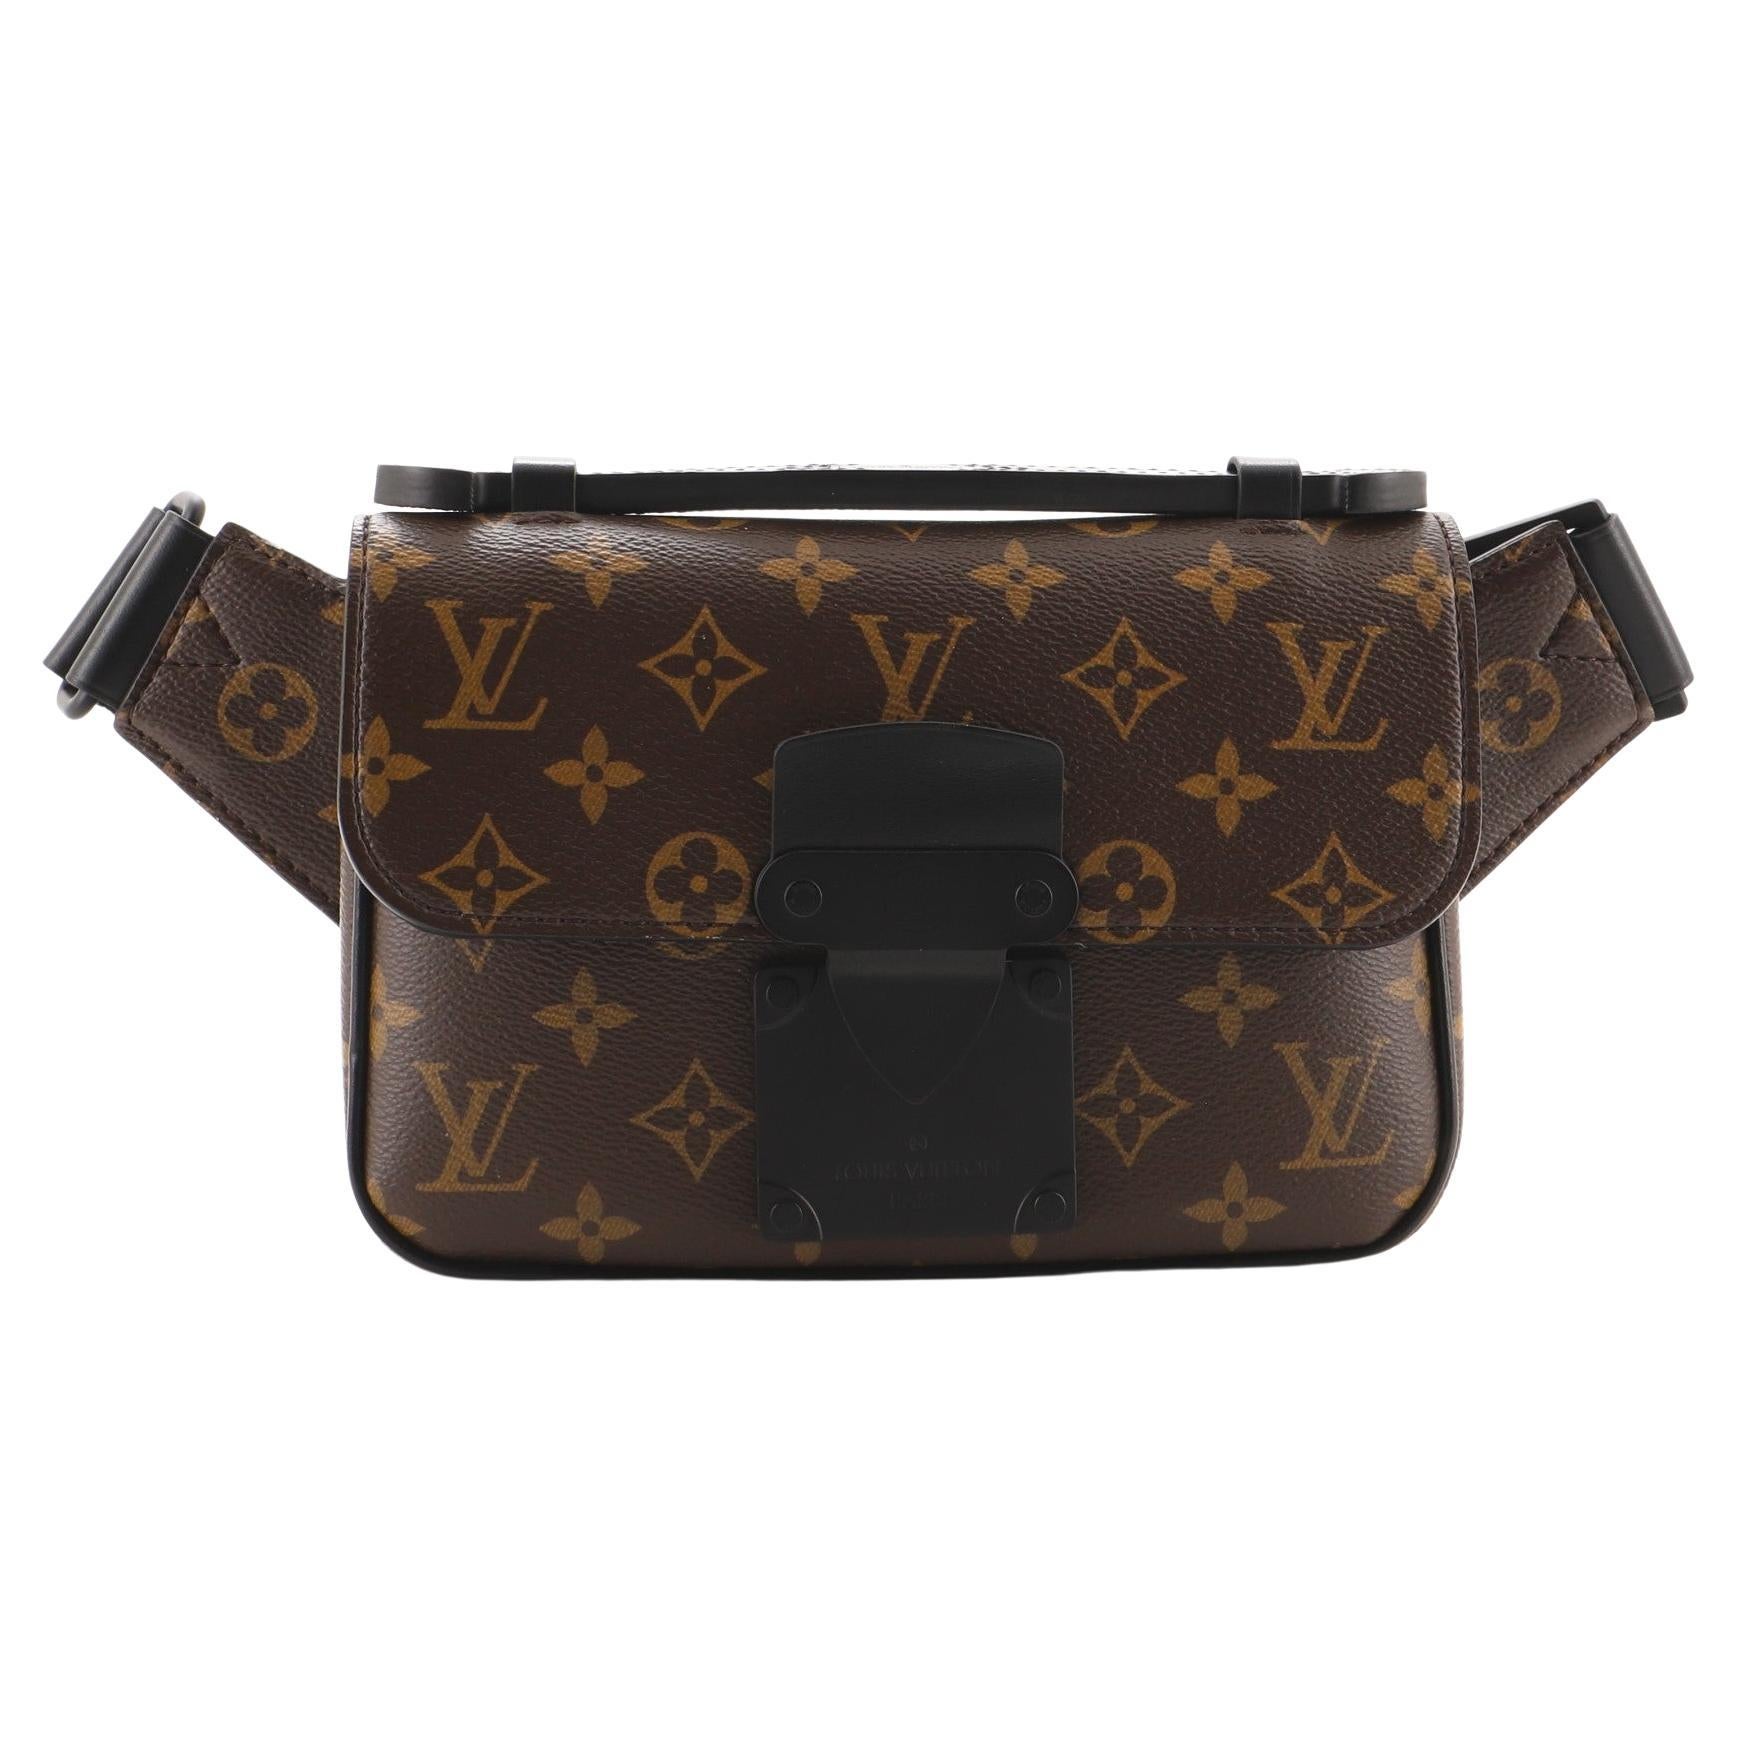 LOUIS VUITTTON, S LOCK SLING BAG, Limited Edition